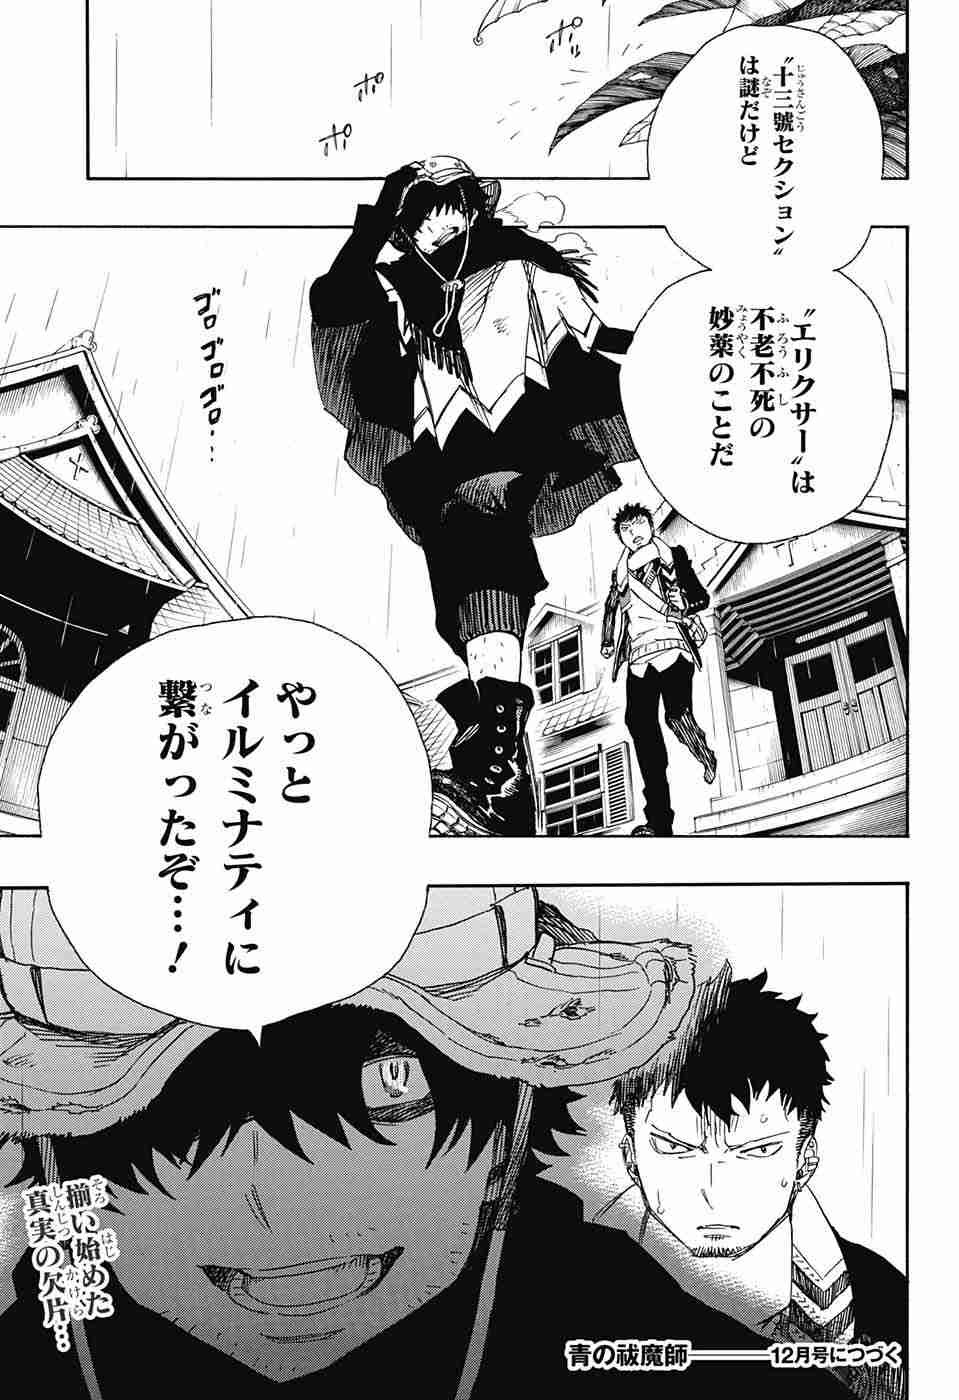 Ao no Exorcist - Chapter 83 - Page 35